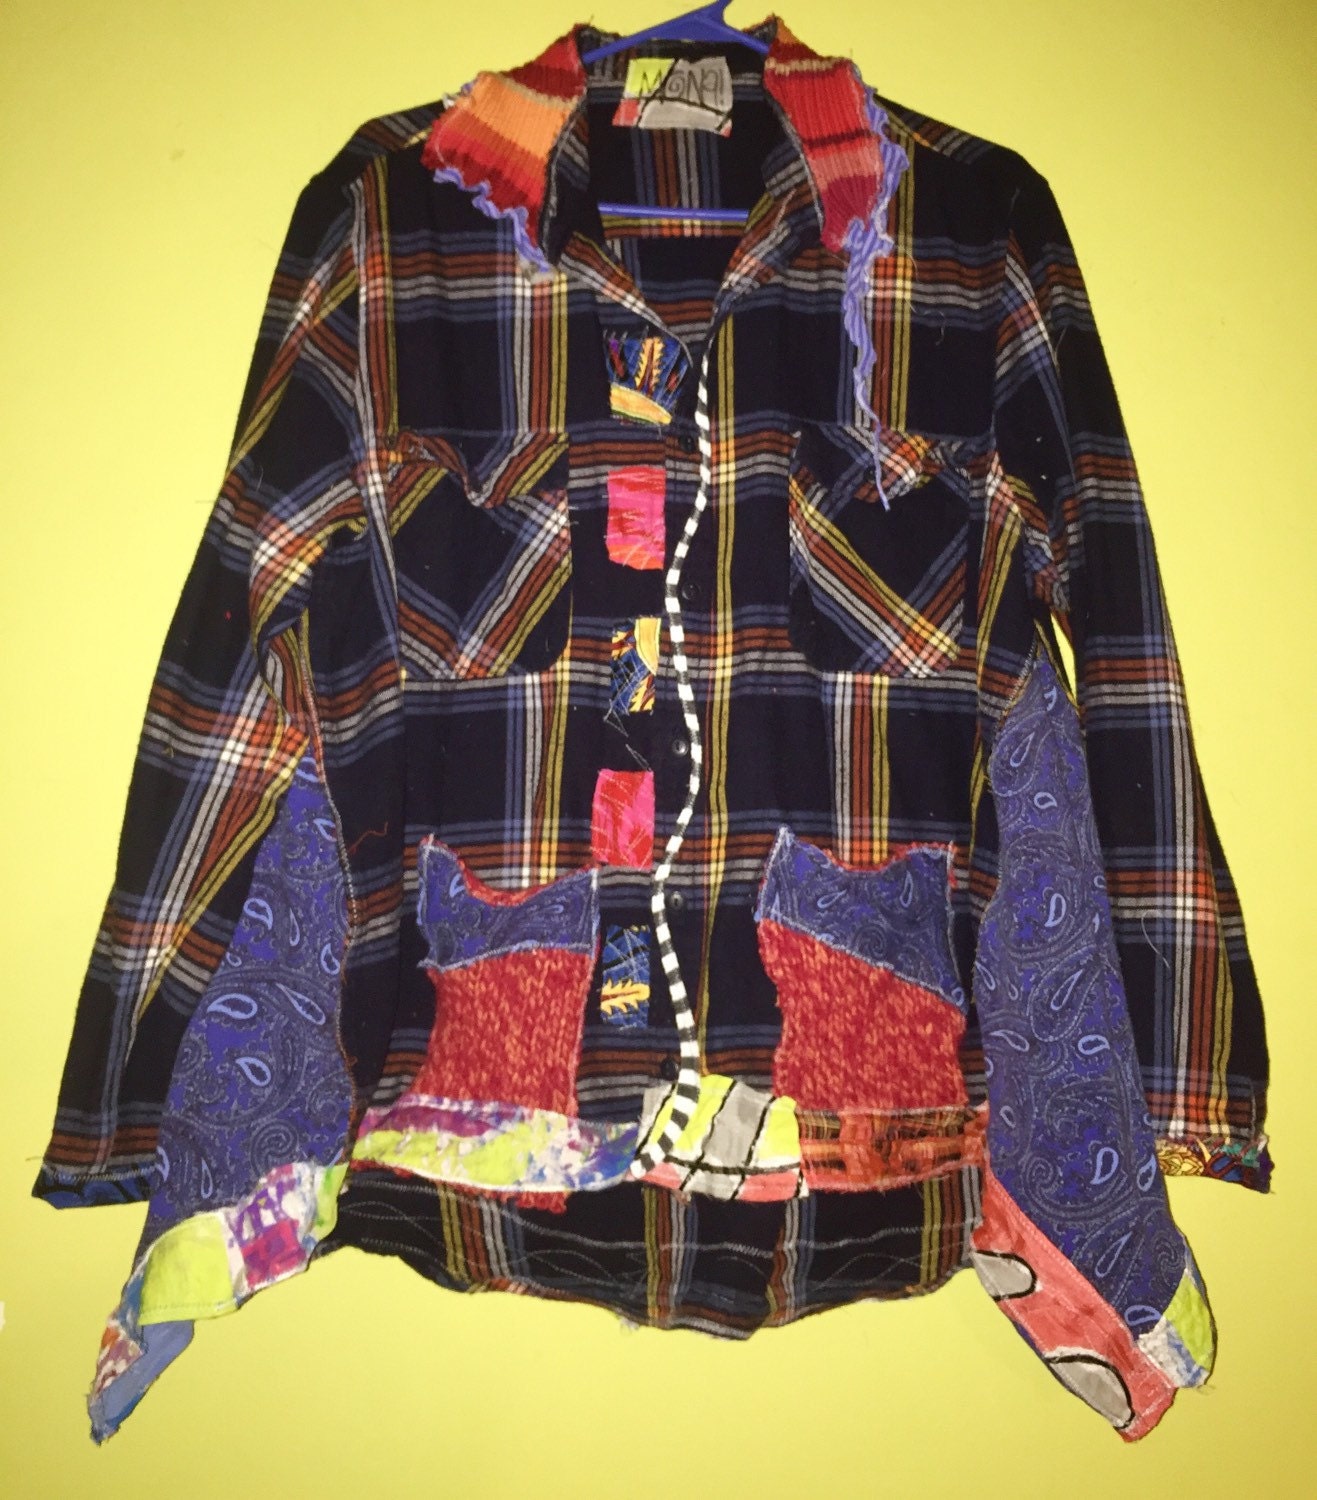 Upcycled plaid flannel shirt jacket fits XL 1X